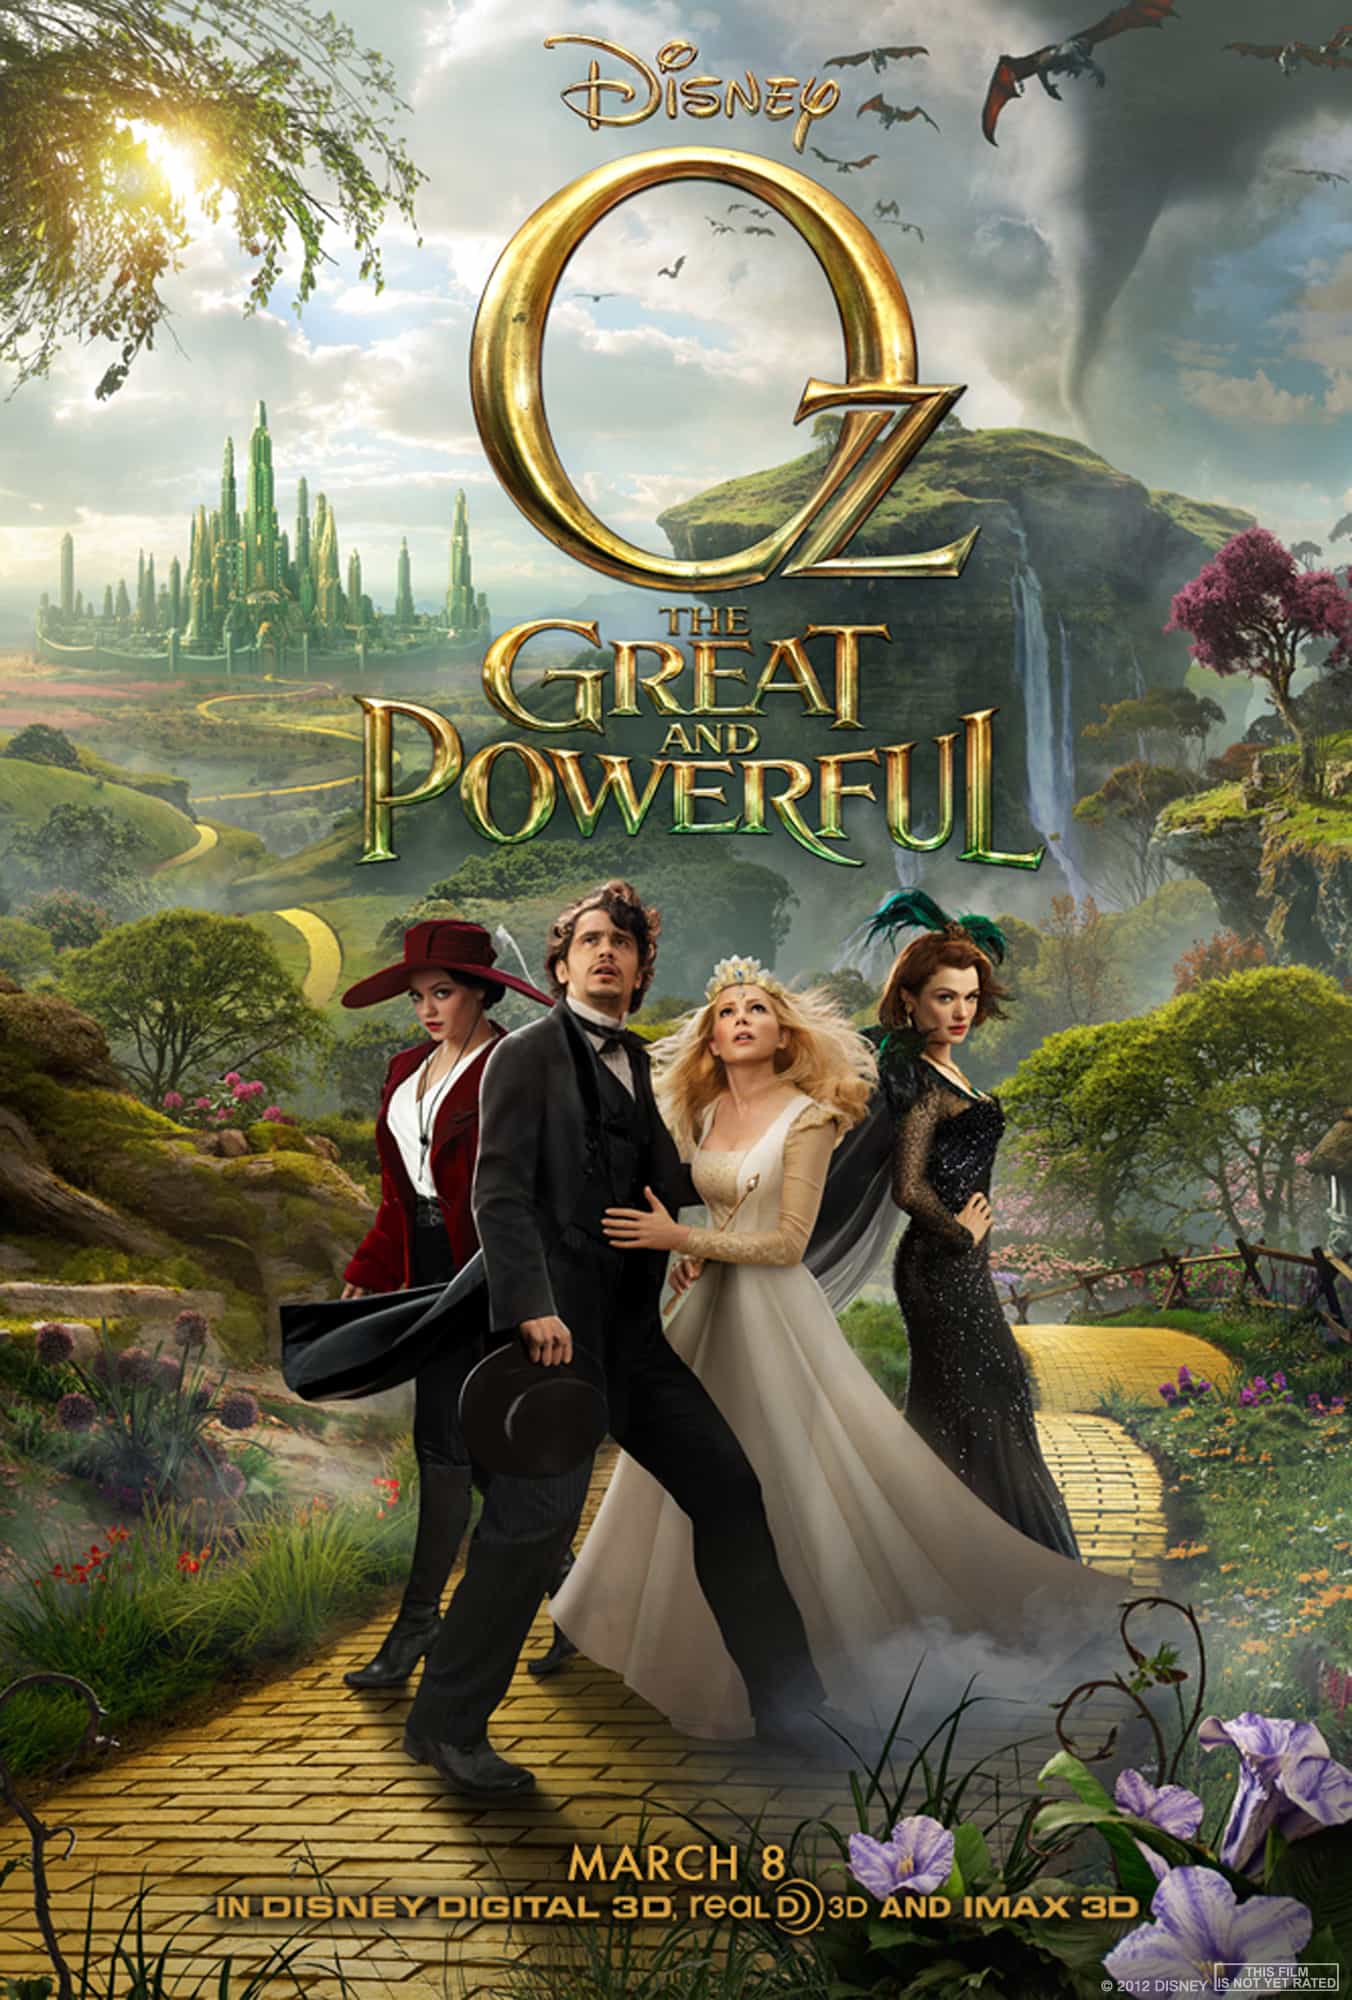 UK Box office report: Oz Still Great and Powerful at the top